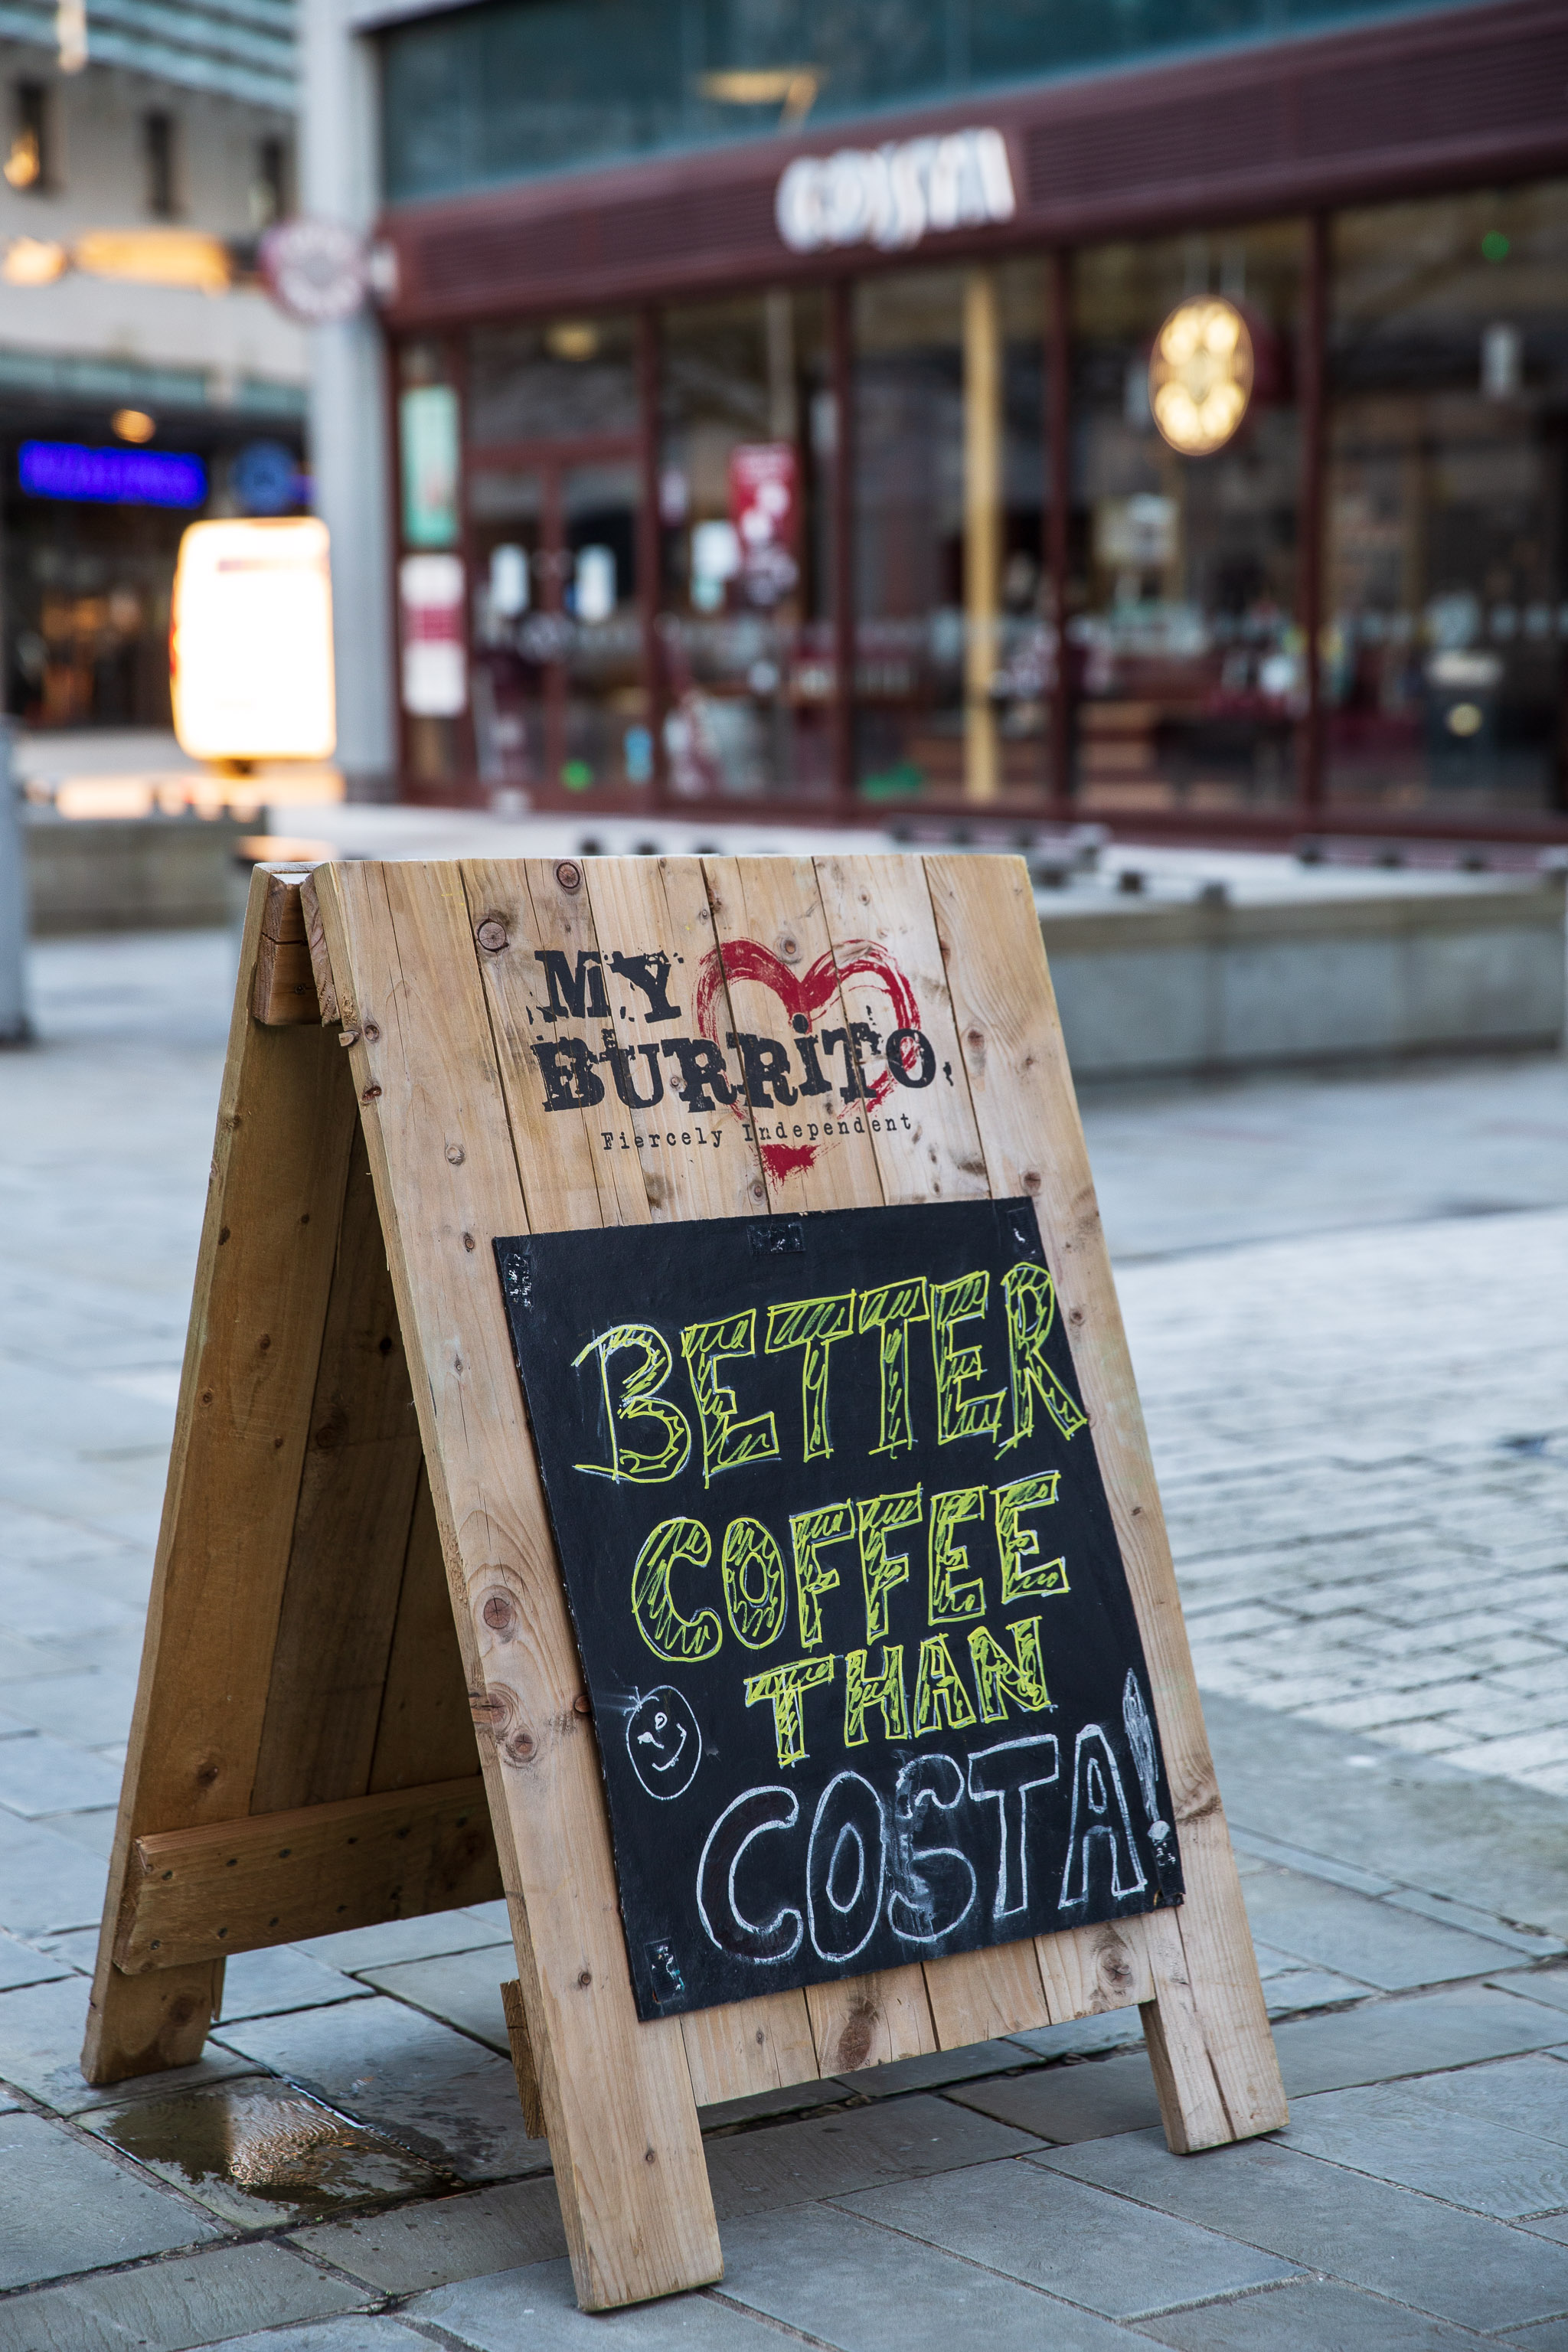 Better Coffee than Costa
Cheeky. I also run a Cafe Signs Tumblr so I'm always on the lookout for good signage.
